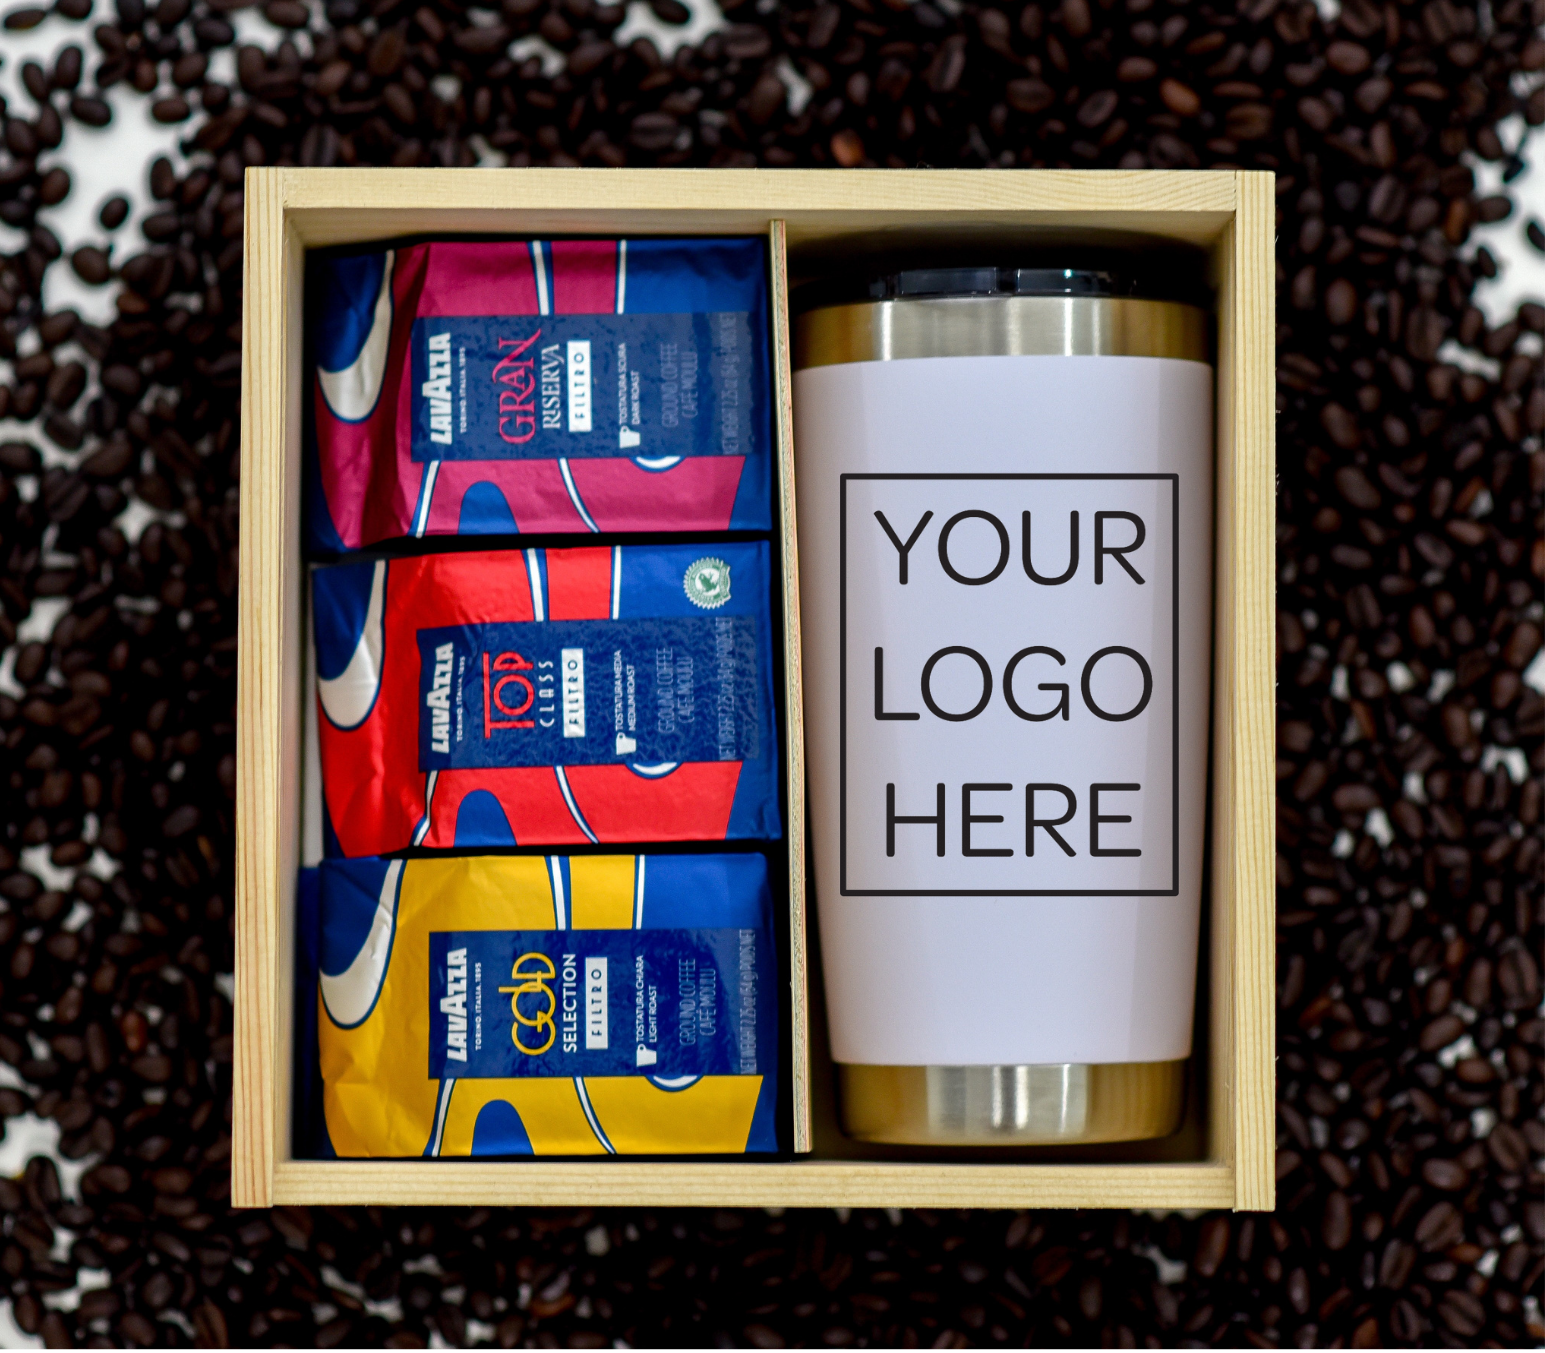 Personalized coffee gift | Corporate gift | Branded corporate gifts | branded mug | coffee gift set